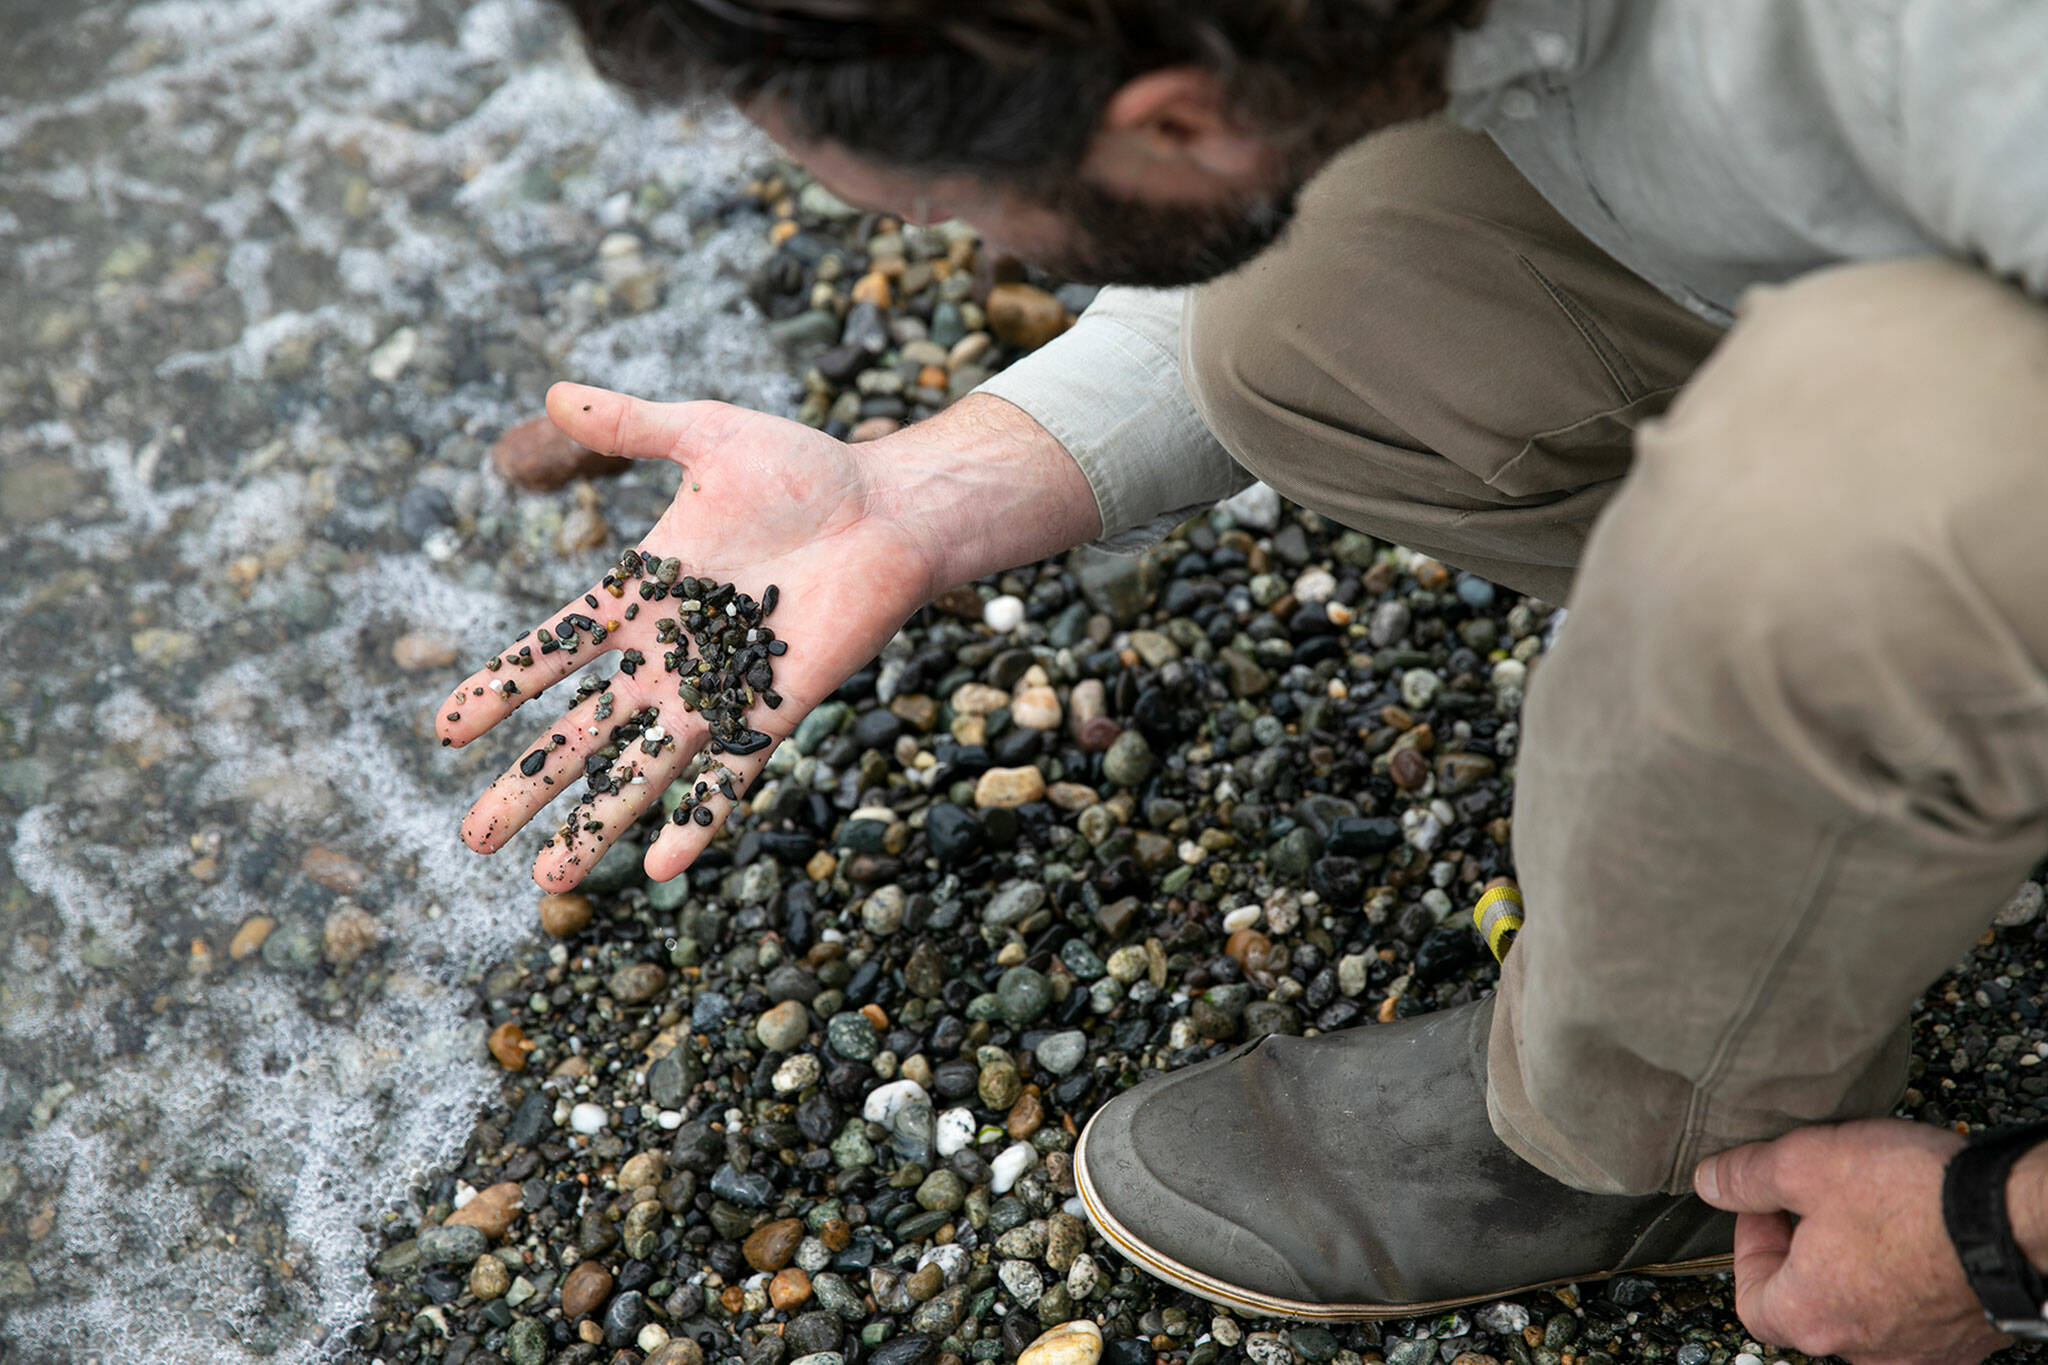 Ryan Elting, conservation director at the Whidbey Camano Land Trust, combs through rocks on the shore on June 10 at the site of the Keystone Preserve near Coupeville. (Ryan Berry / The Herald)